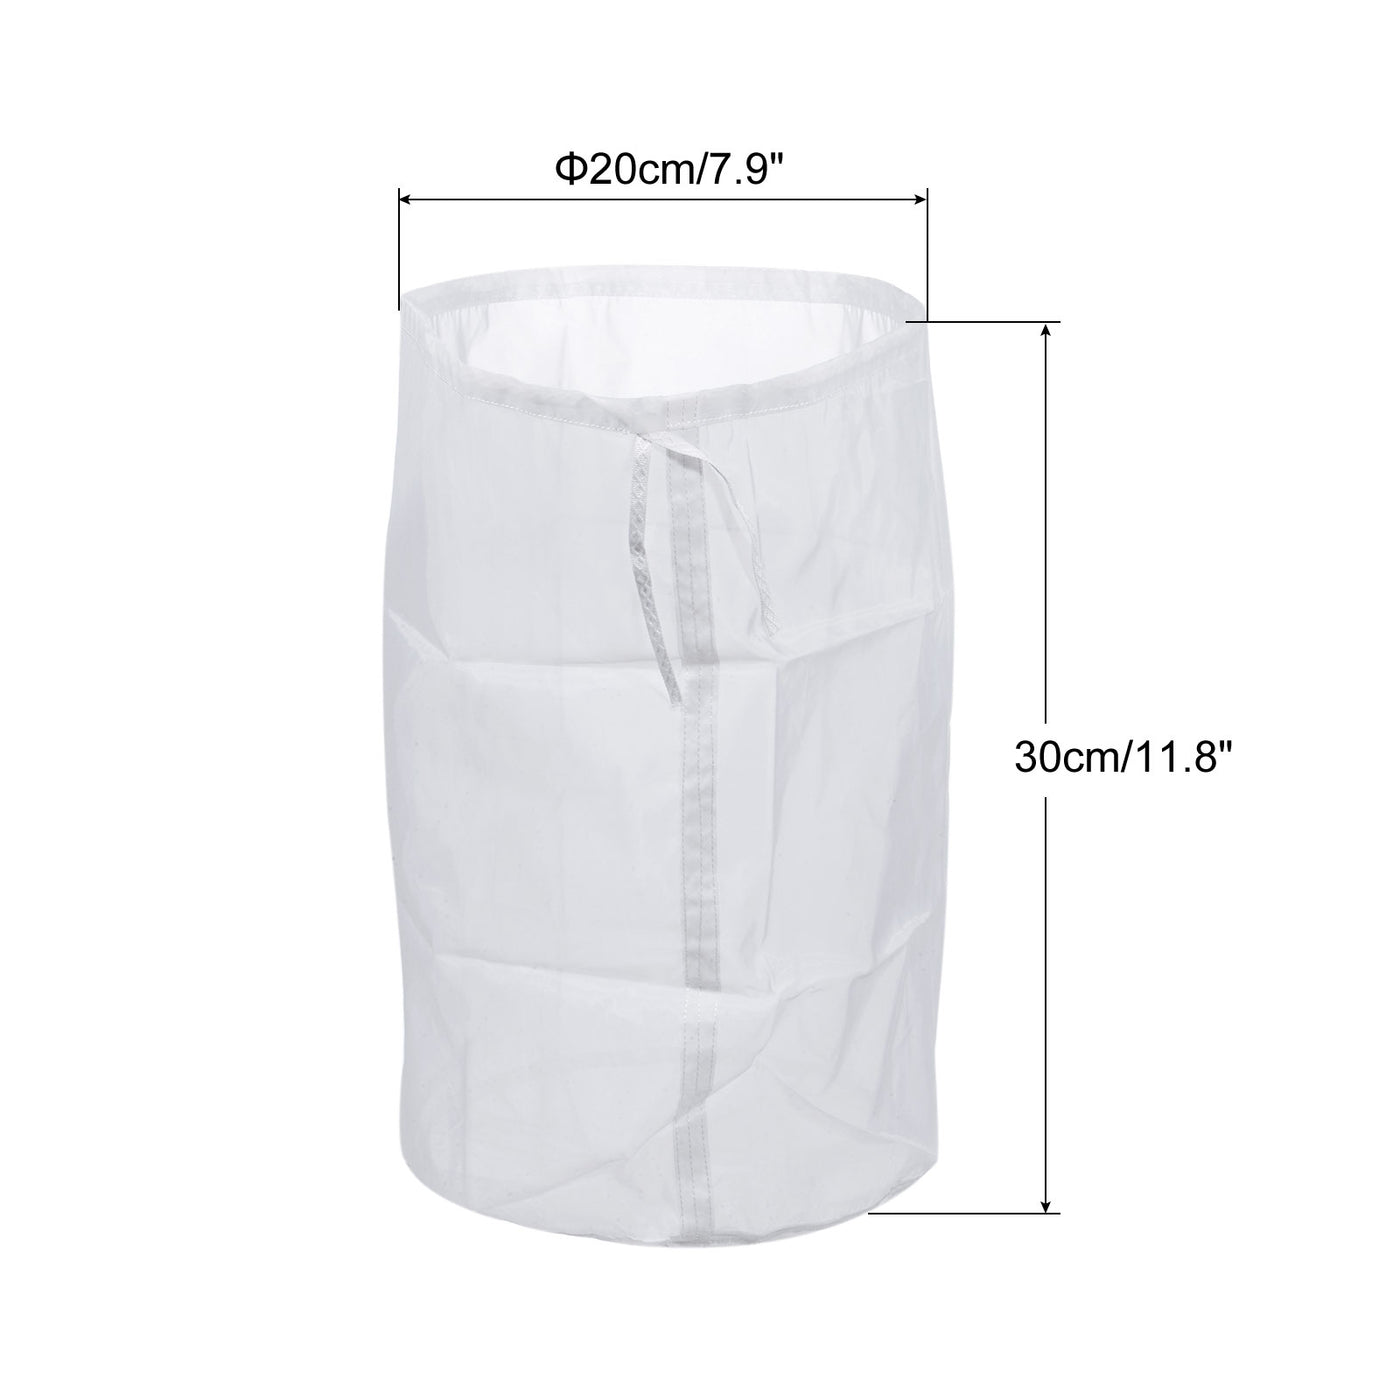 uxcell Uxcell 200 Mesh Paint Filter Bag 7.9" Dia Nylon Strainer with Drawstring for Filtering